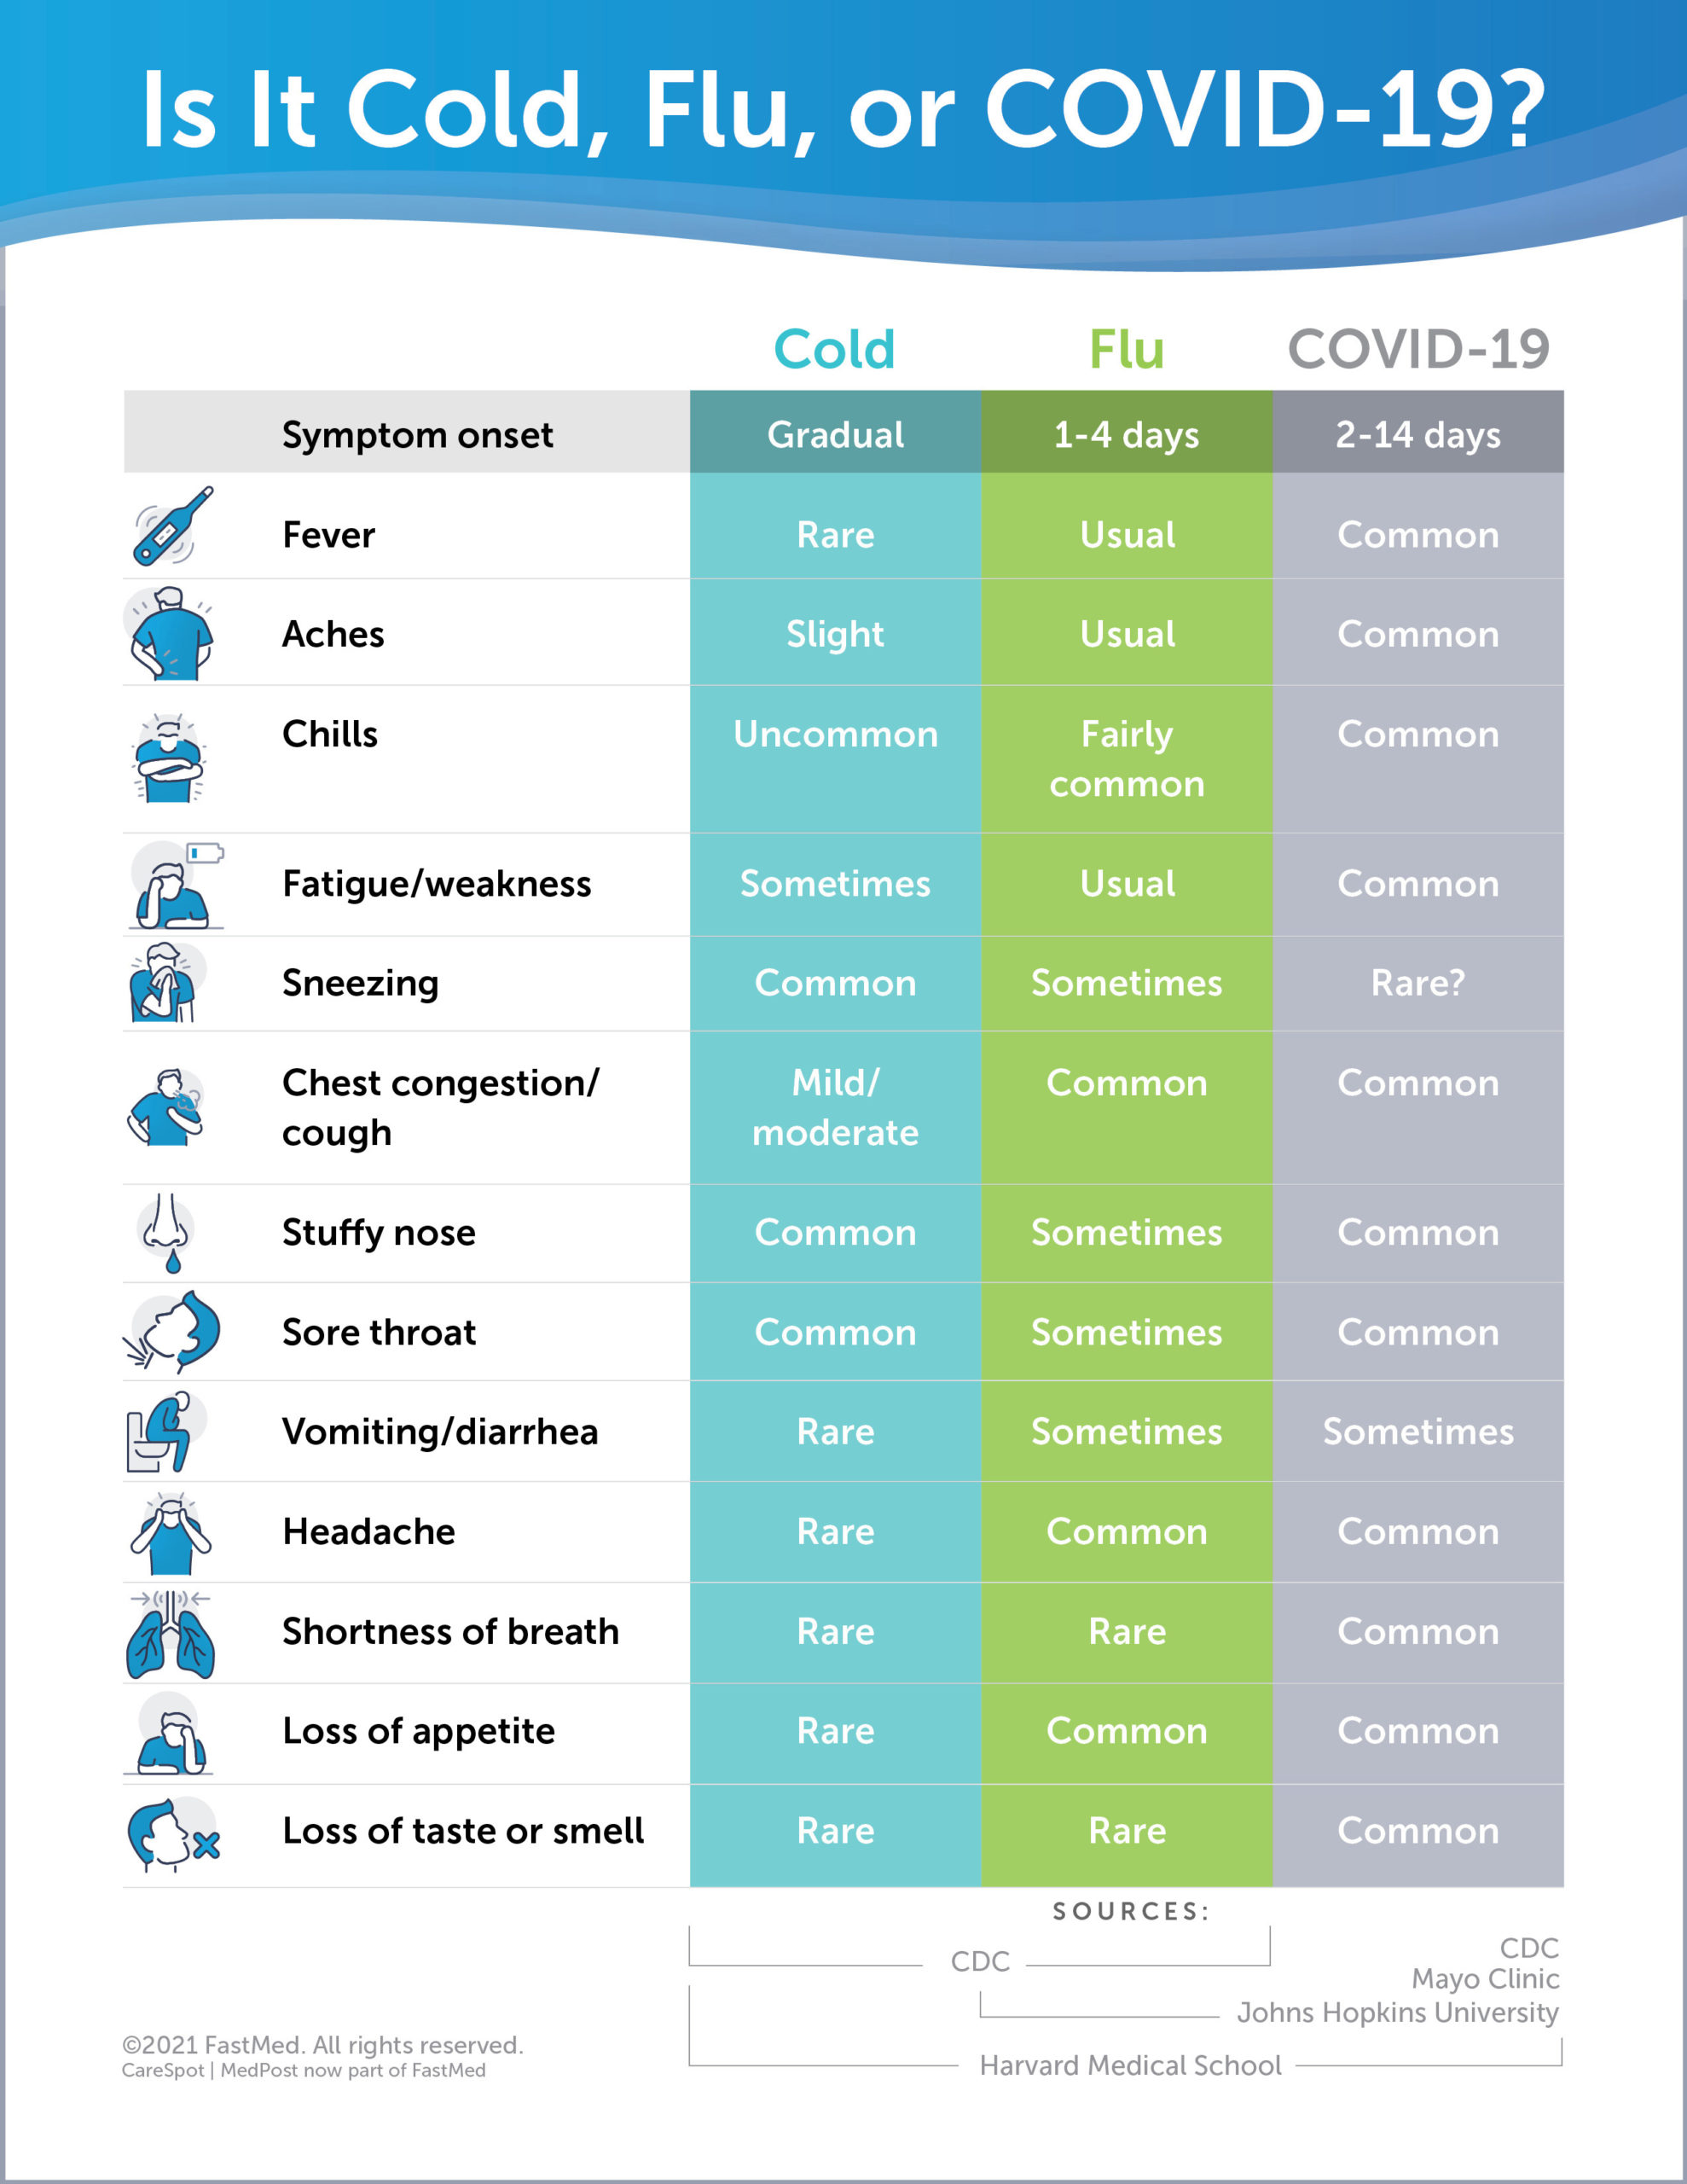 COVID19 vs. Flu and Colds Should You Get Tested?